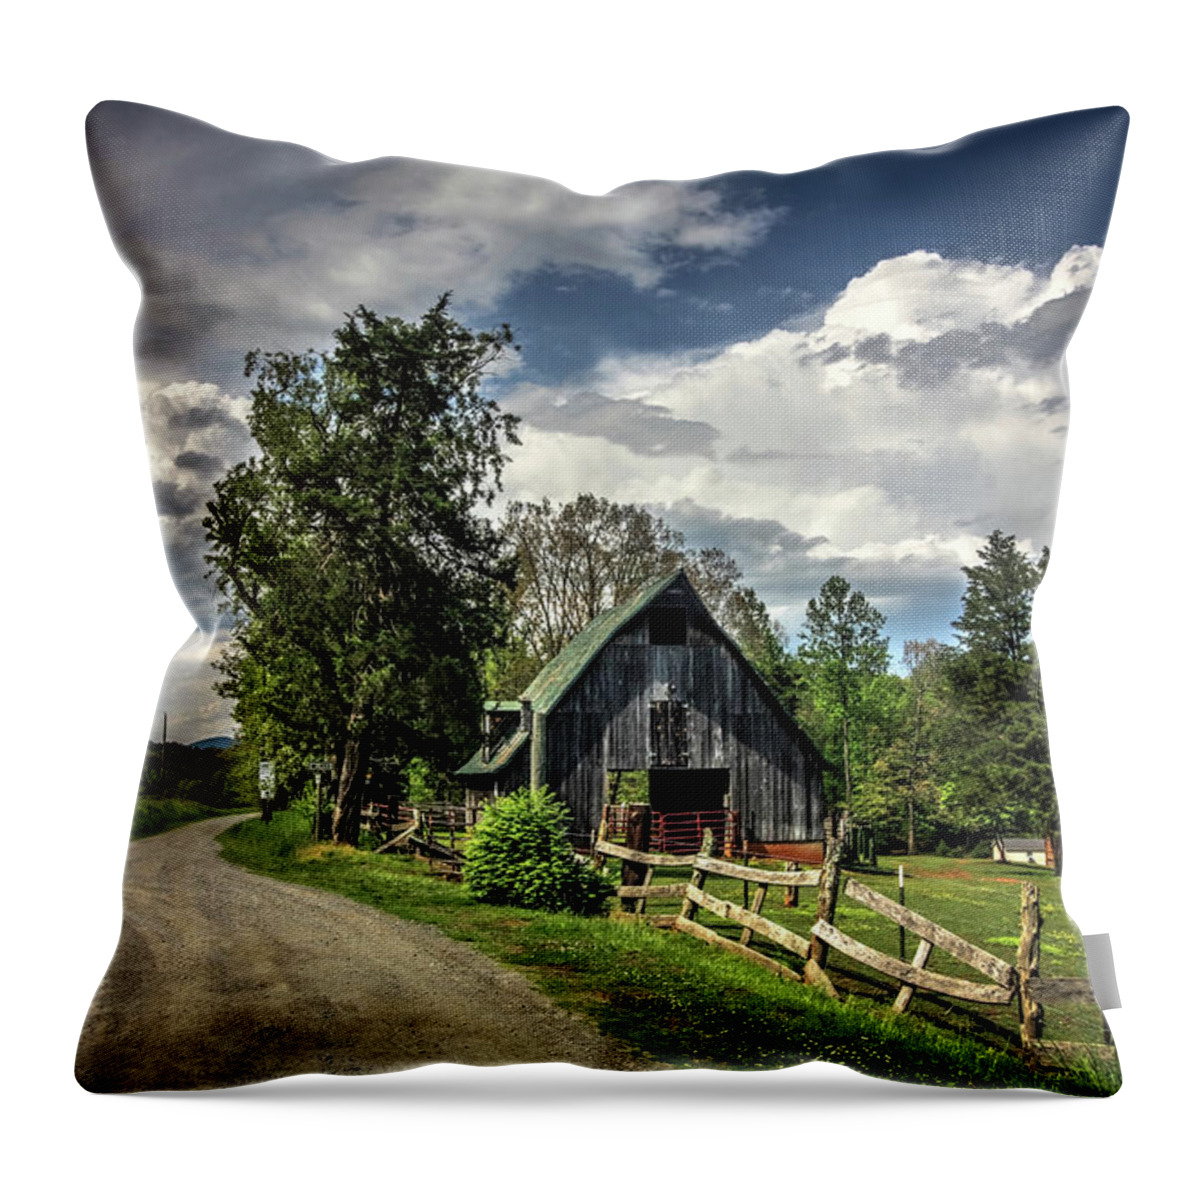 Thunderstorm Throw Pillow featuring the photograph Storm Brewing by Bob Bell